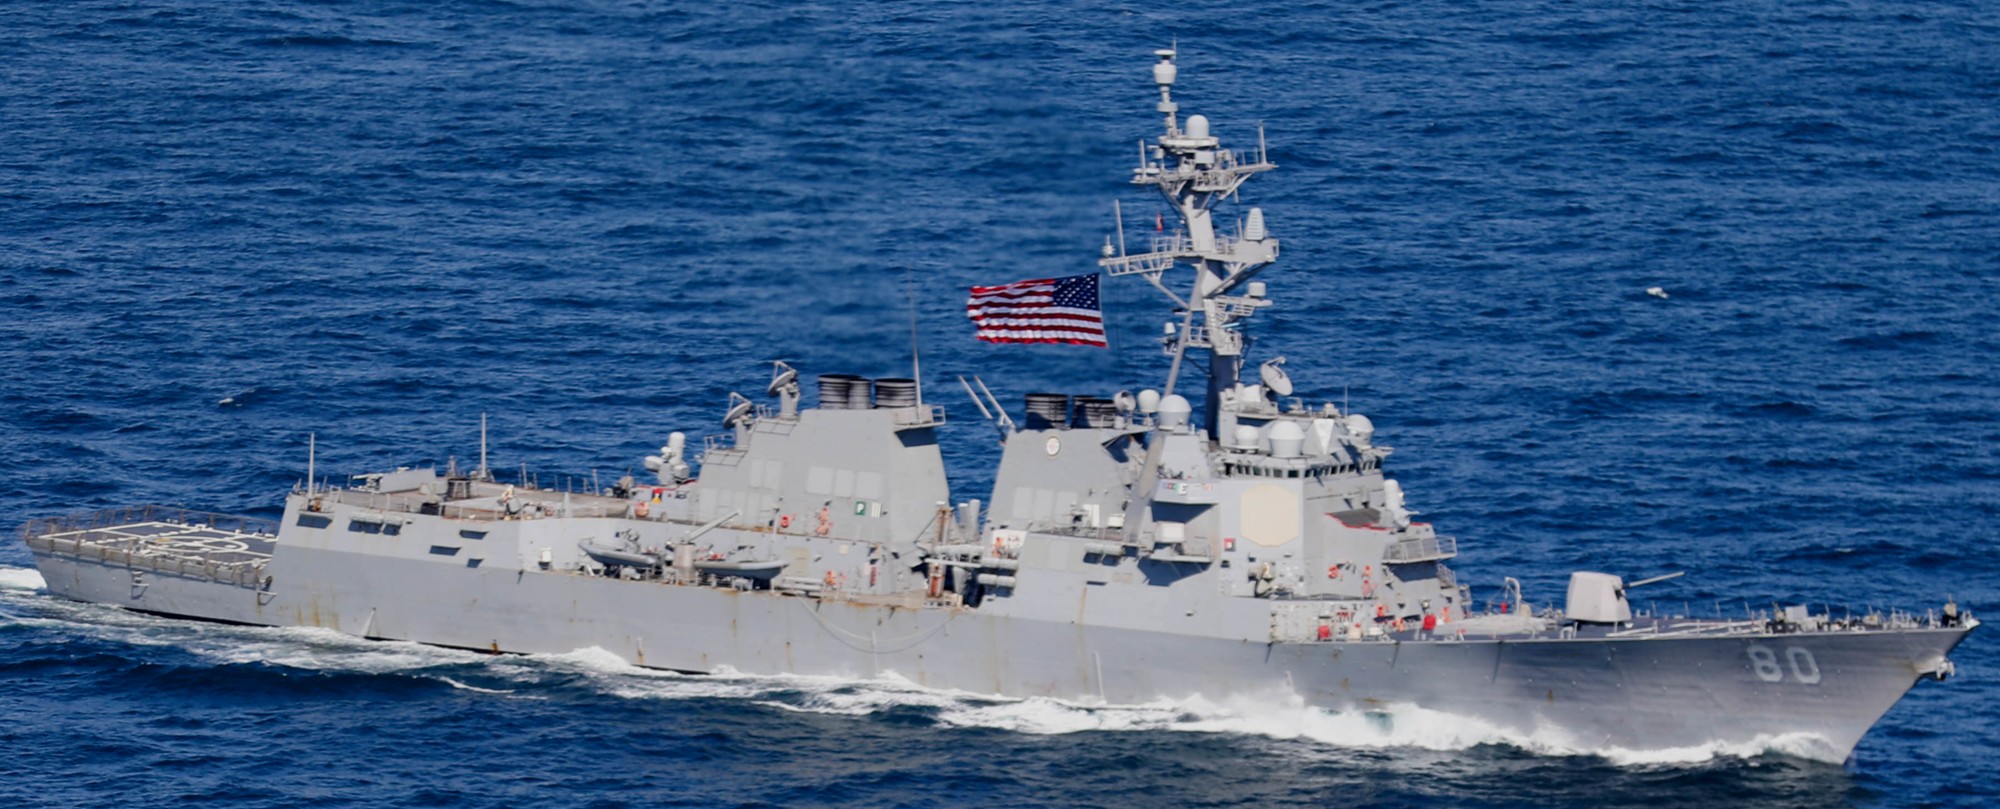 ddg-80 uss roosevelt guided missile destroyer arleigh burke class nato at-sea demo formidable shield 2021 78